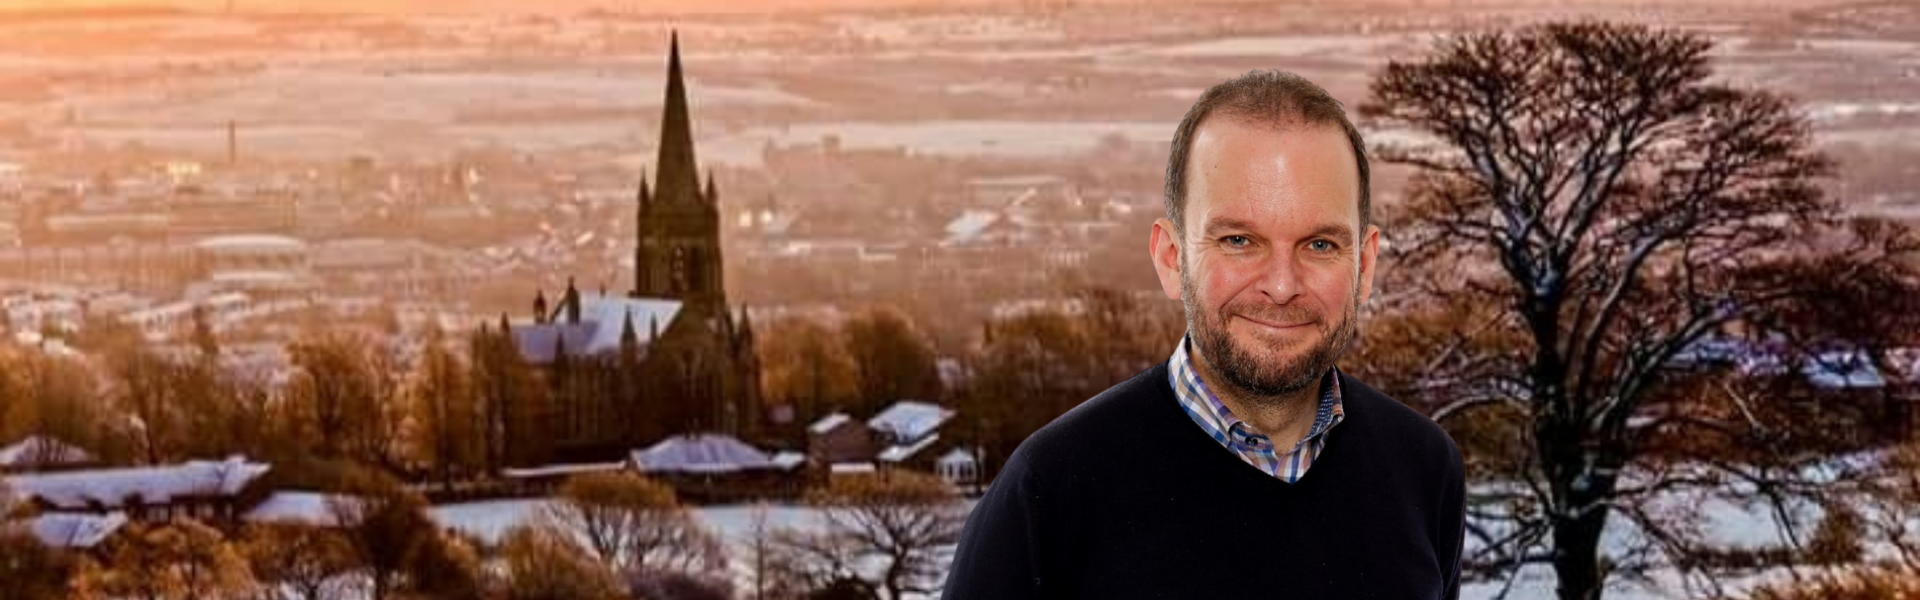  The image presents James Daly, Conservative Candidate before a snow-draped Walshaw backdrop. His attire is casual with a dark sweater over a checkered shirt. The winter scene behind him showcases a church spire amid the snow-blanketed village, under a warm-hued sky.